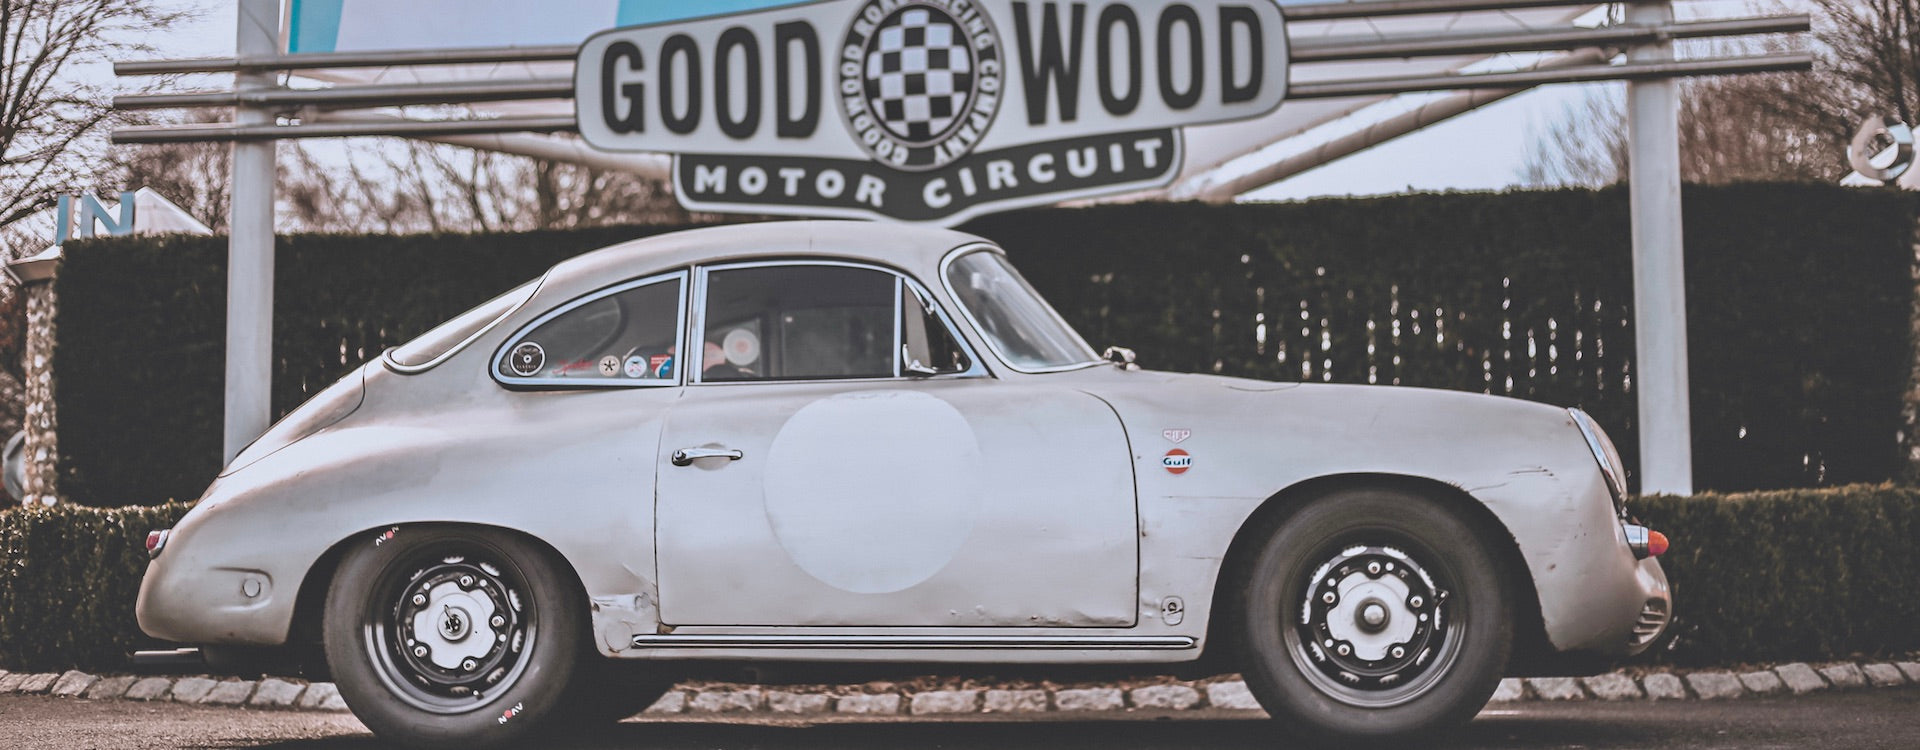 Cool Flo Silver Porsche 356 parked side-on below the Goodwood Motor Circuit sign.